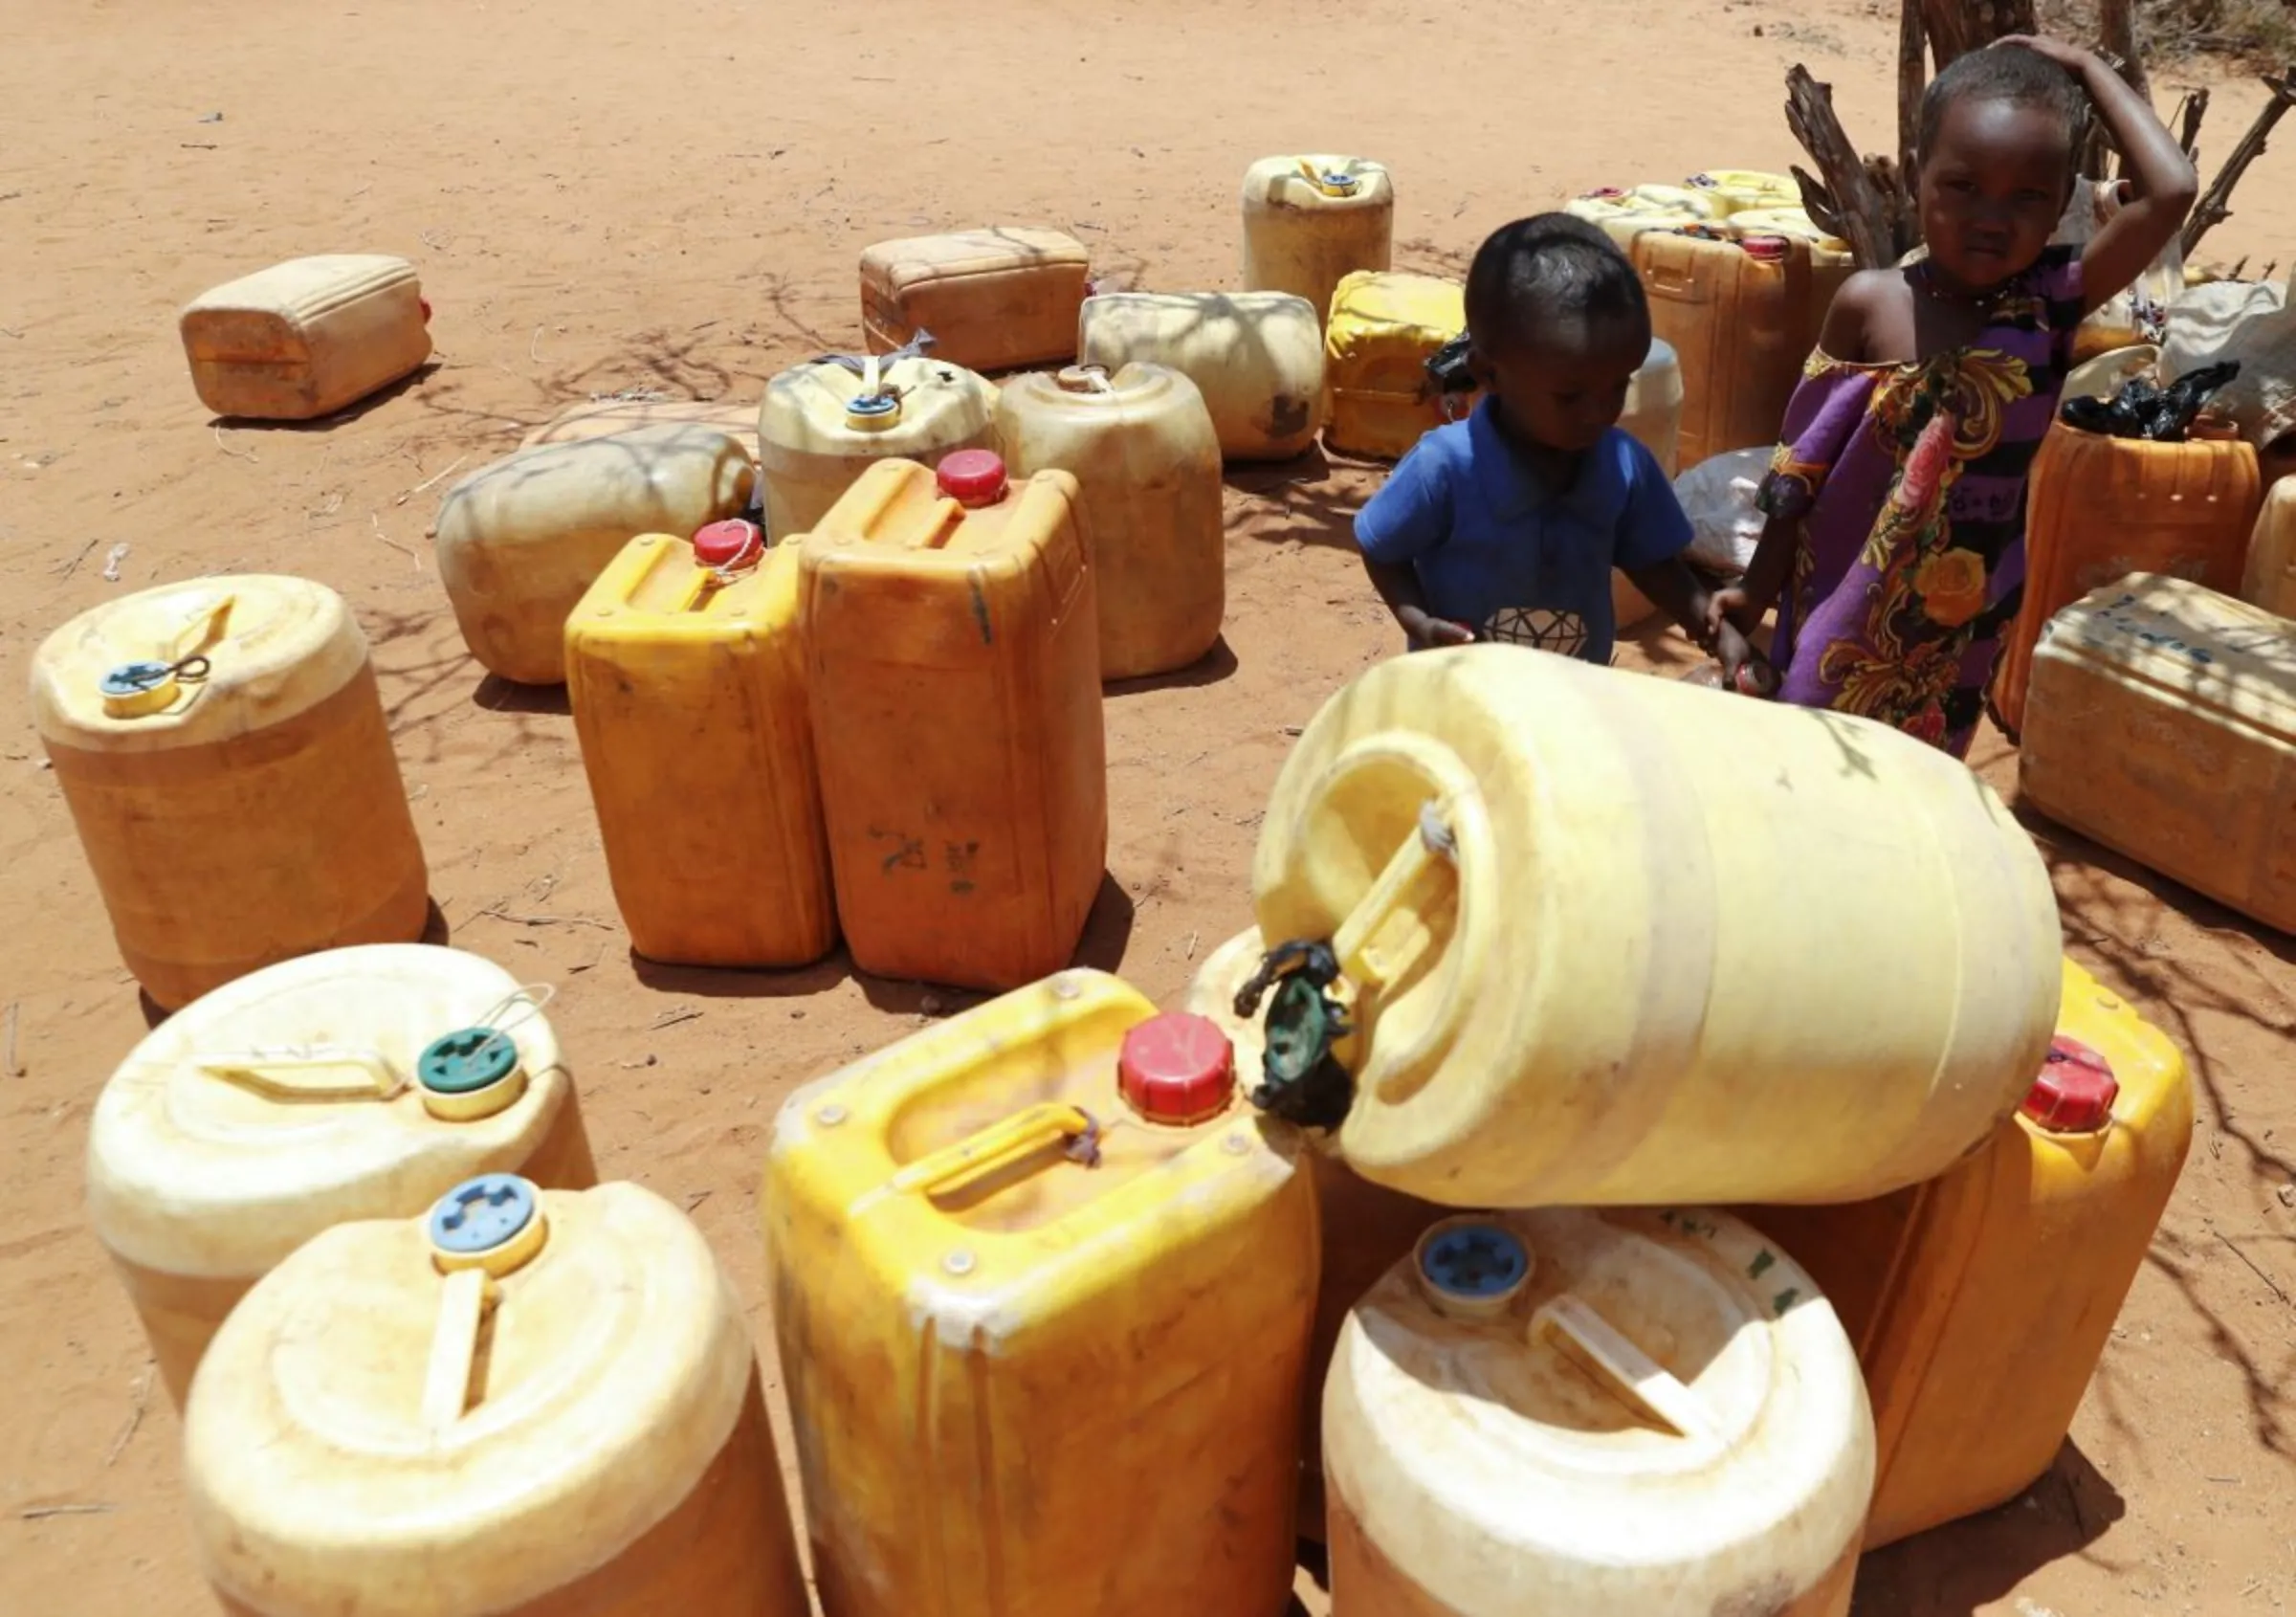 Children stand by their family jerrycans as they wait for their turn to collect water at a borehole following a prolonged drought near the Kenya-Ethiopia border in Kubdishan, in Mandera region, Kenya September 1, 2022. REUTERS/Thomas Mukoya